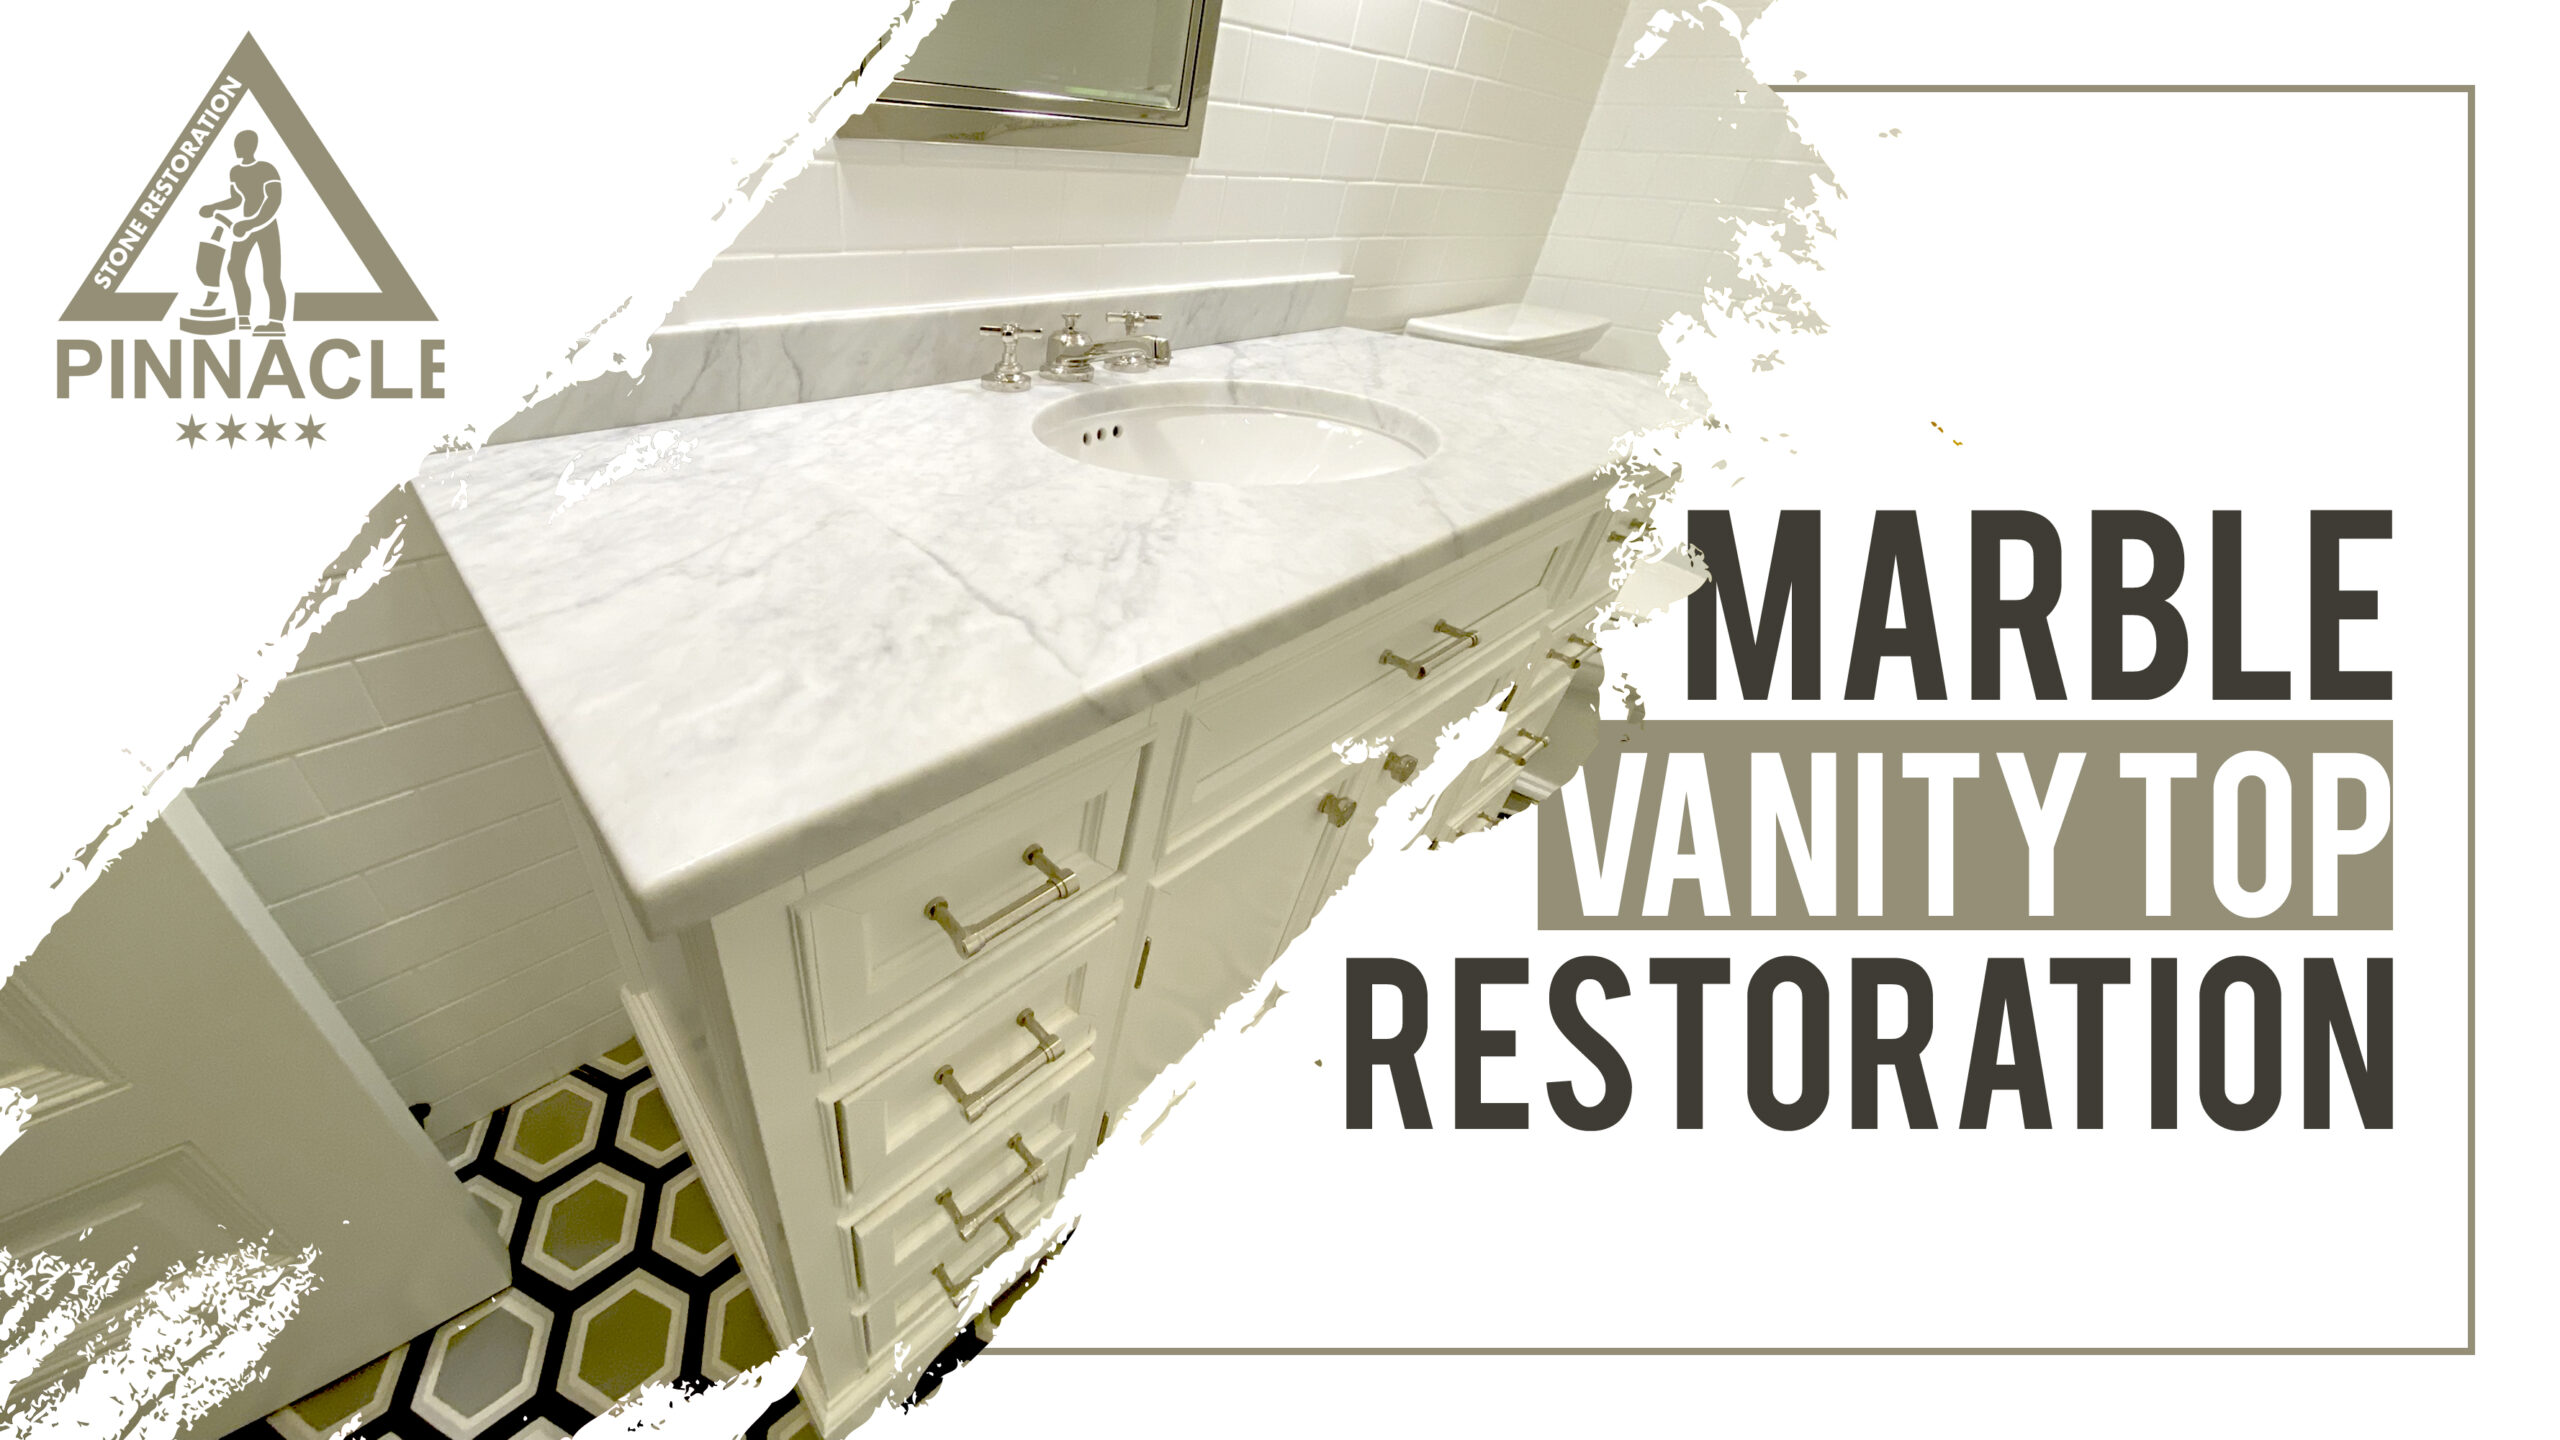 White marble vanity top restoration, honing, sealing (etch marks, scratches, stains, dullness)